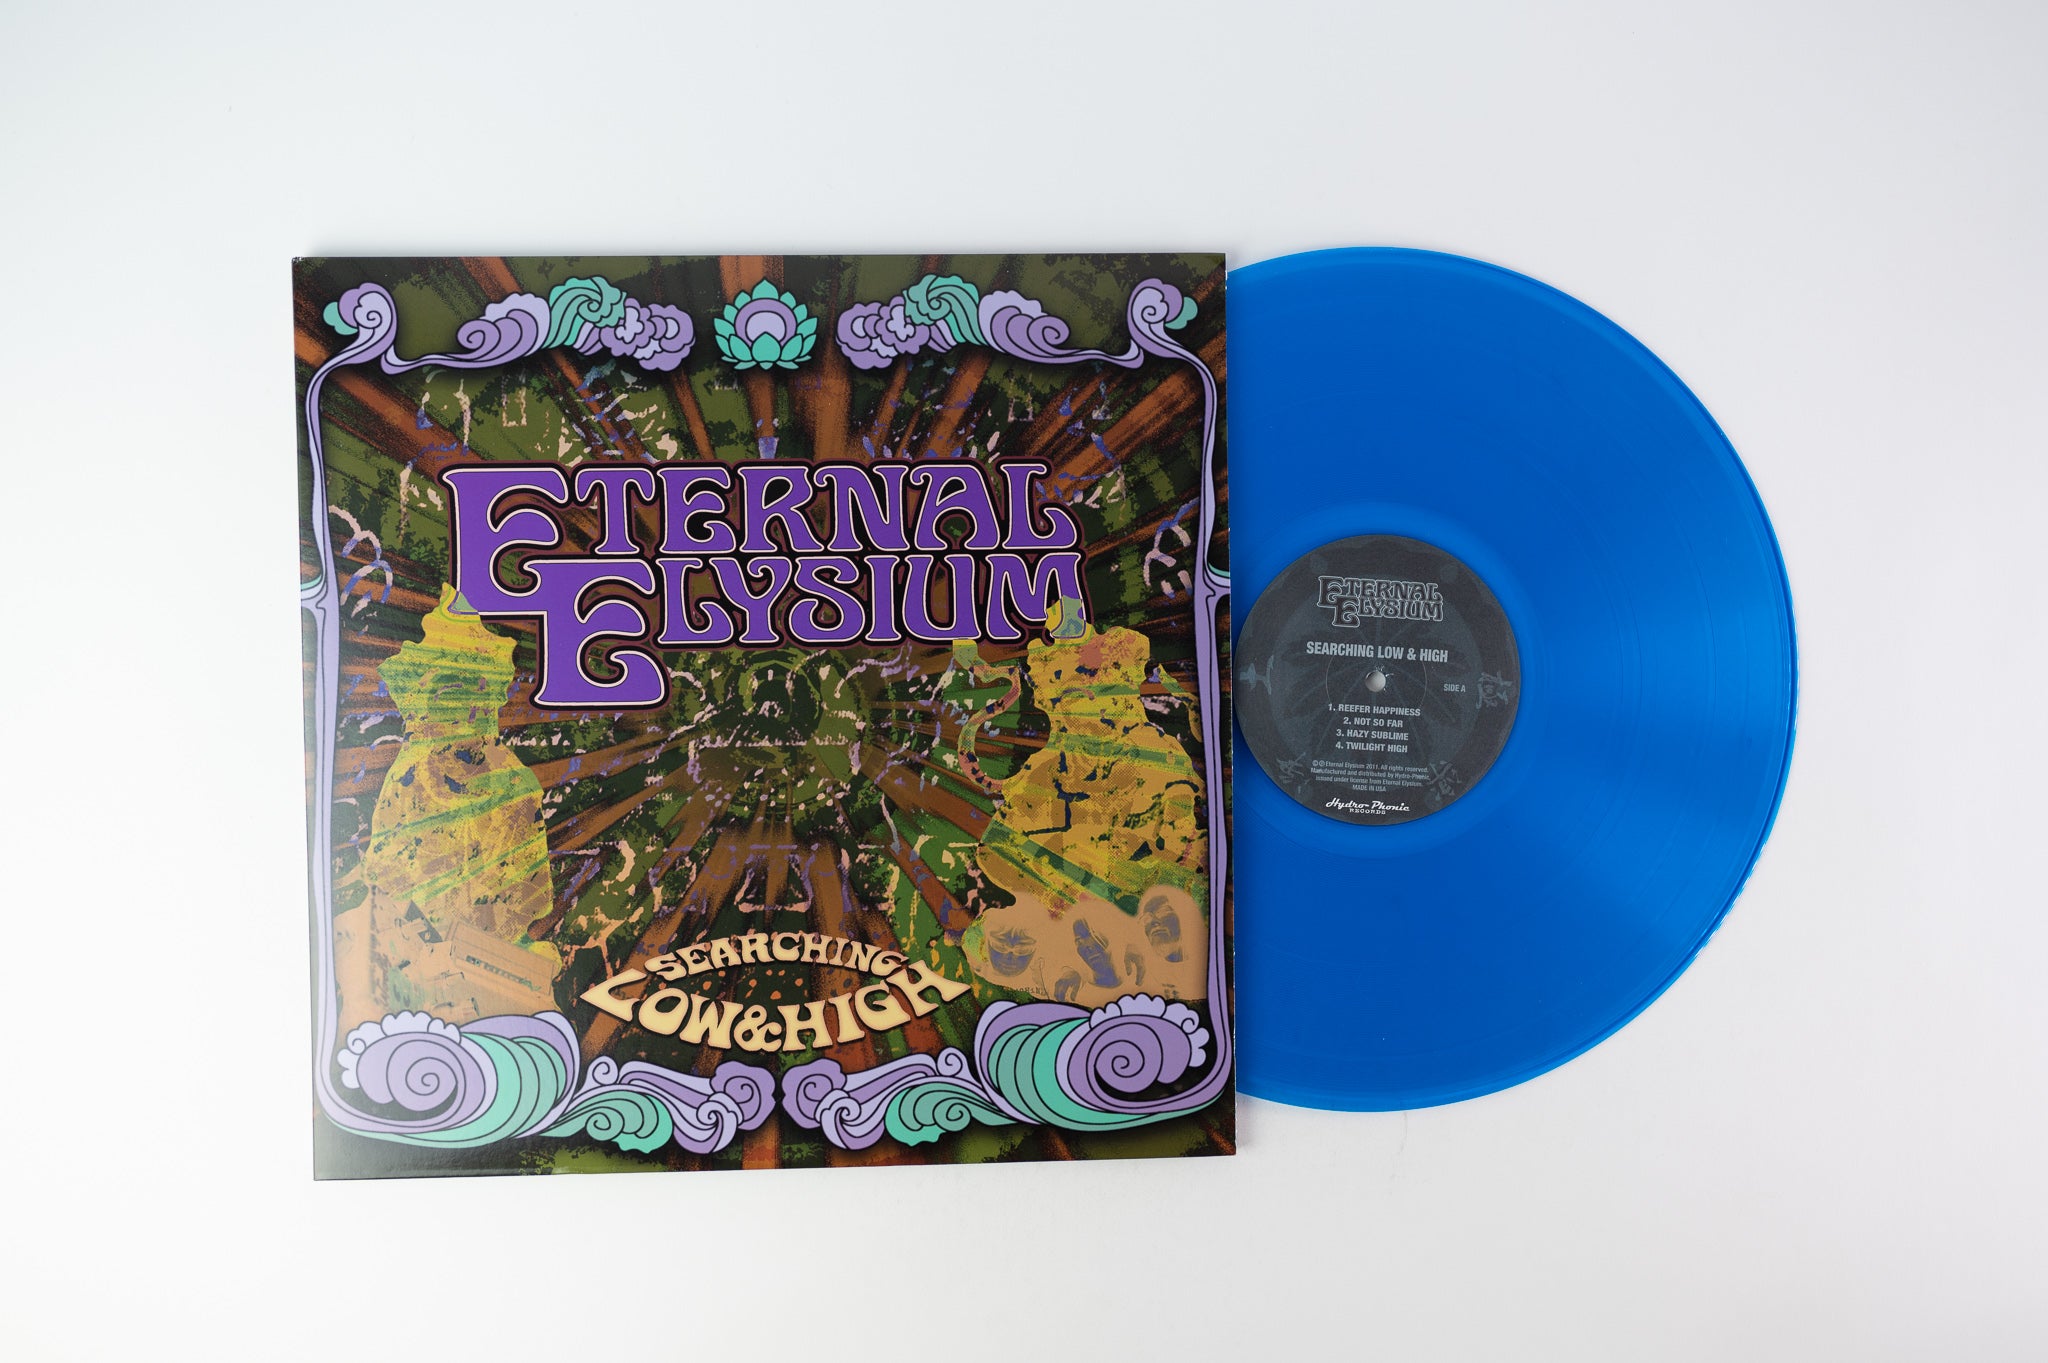 Eternal Elysium - Searching Low & High on Hyrdo-Phonic Limited Blue and Violet With Bonus 10"